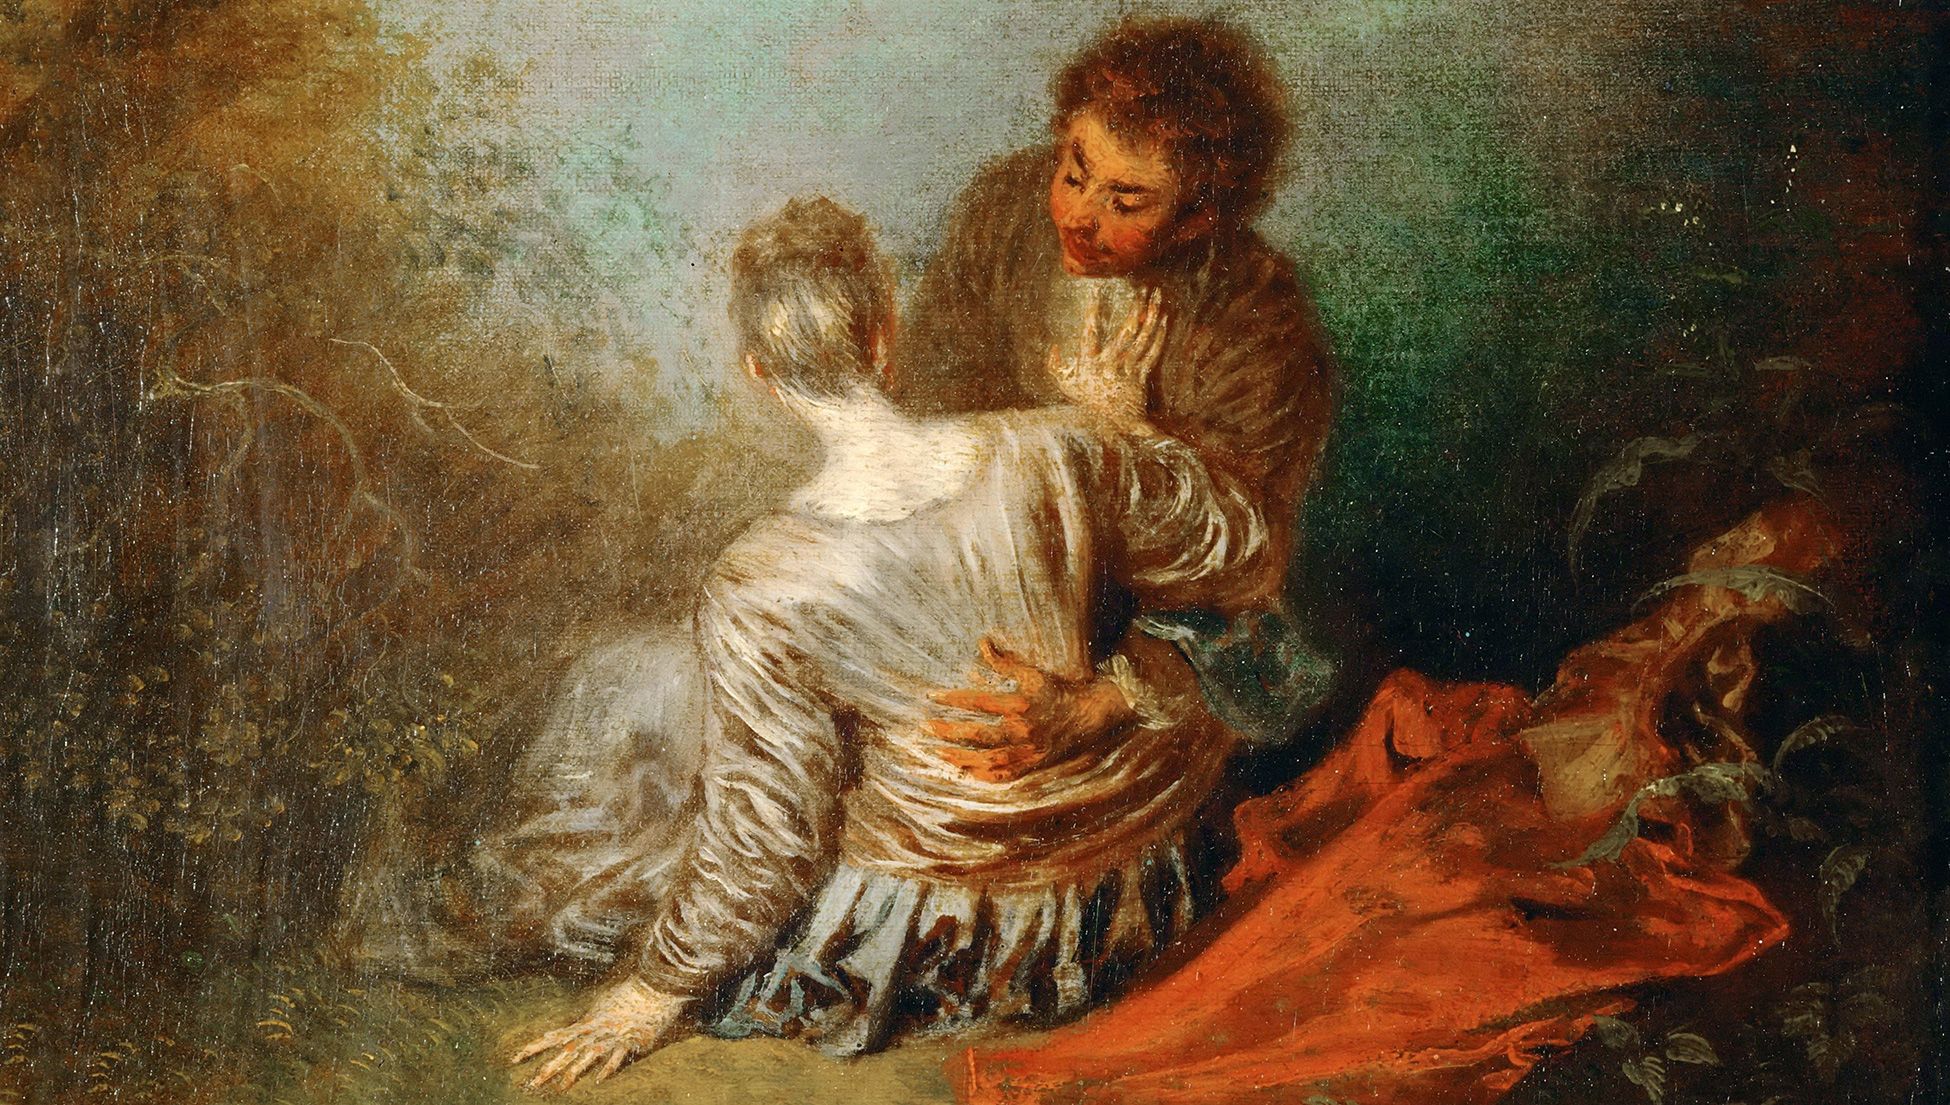 1800 Century Sexual Practices - Working, flirting and sex: courtship in 18th-century France | Psyche Ideas